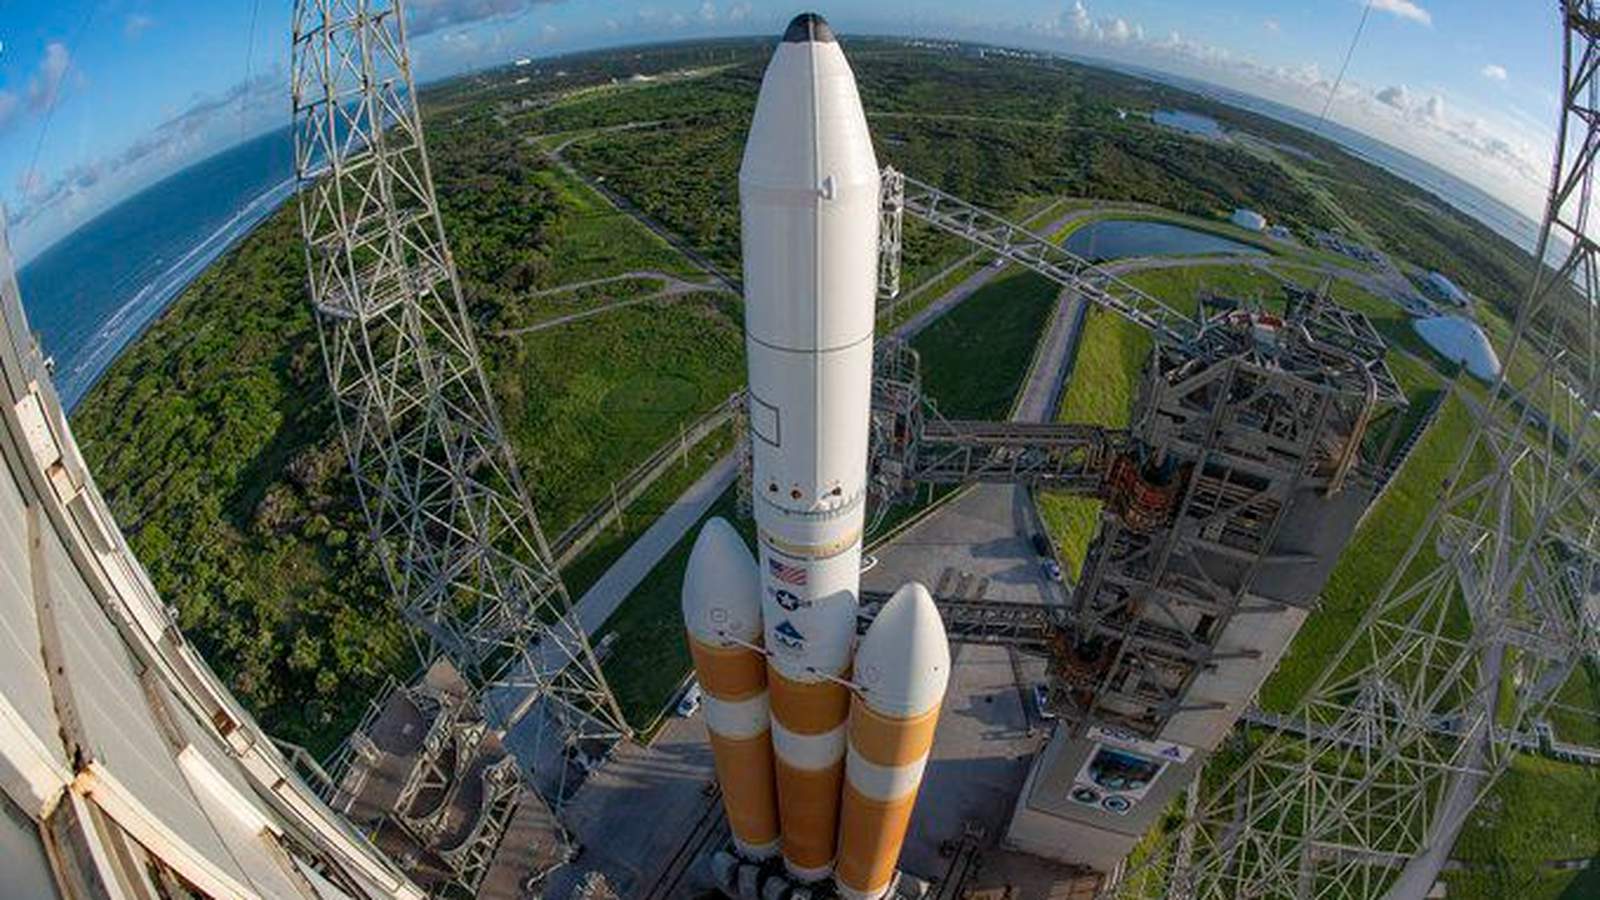 UPDATE: ULA launch scrubbed after weather delayed prelaunch preparations